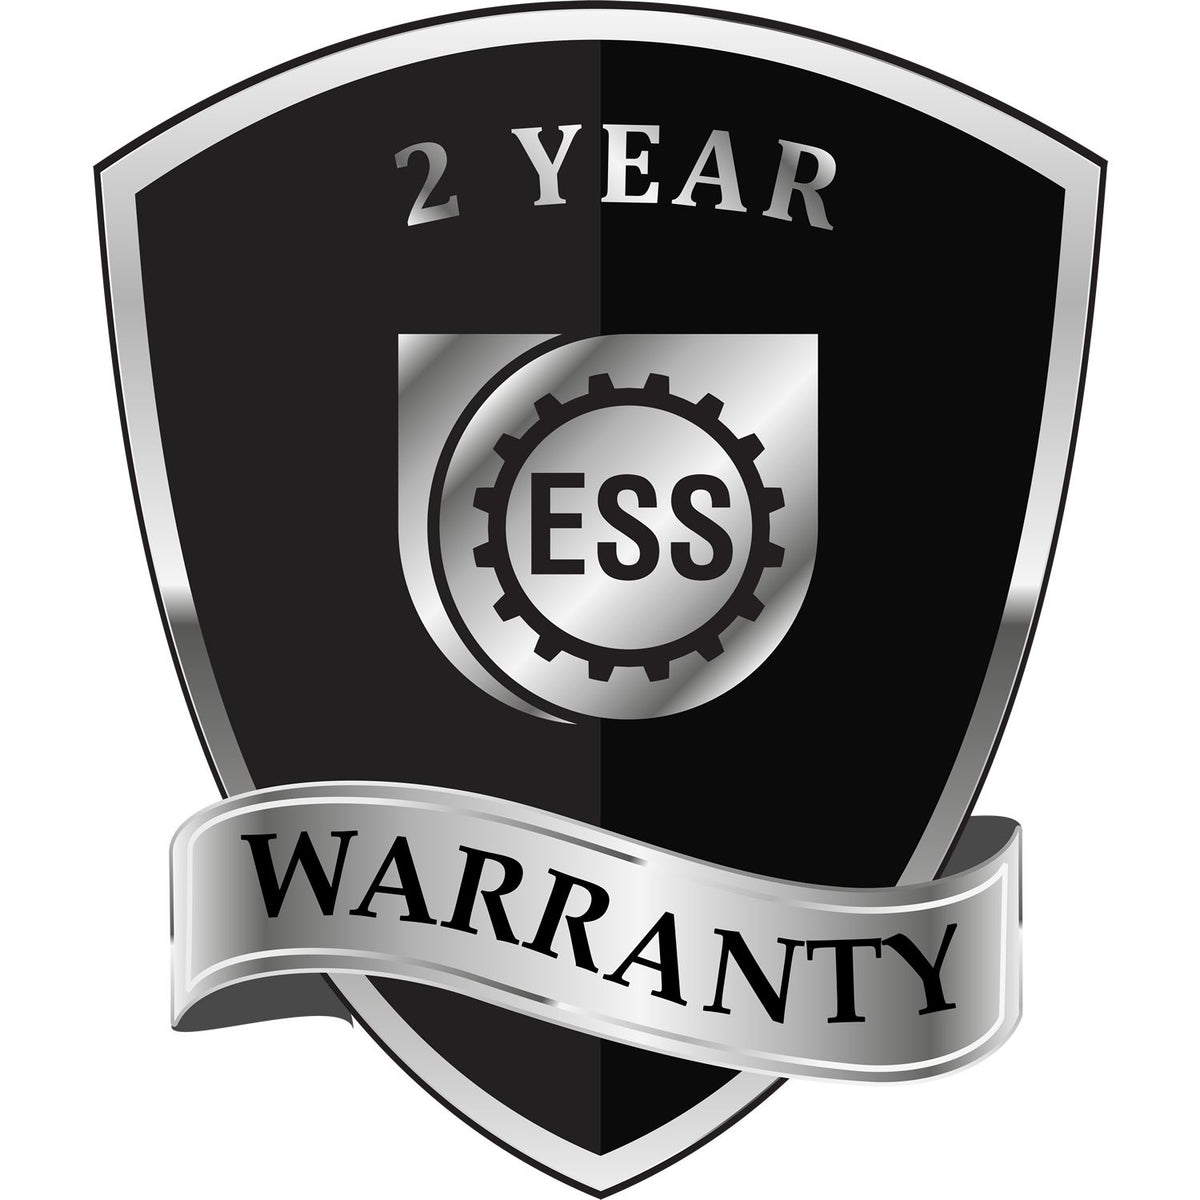 A black and silver badge or emblem showing warranty information for the Heavy Duty Cast Iron Wisconsin Geologist Seal Embosser